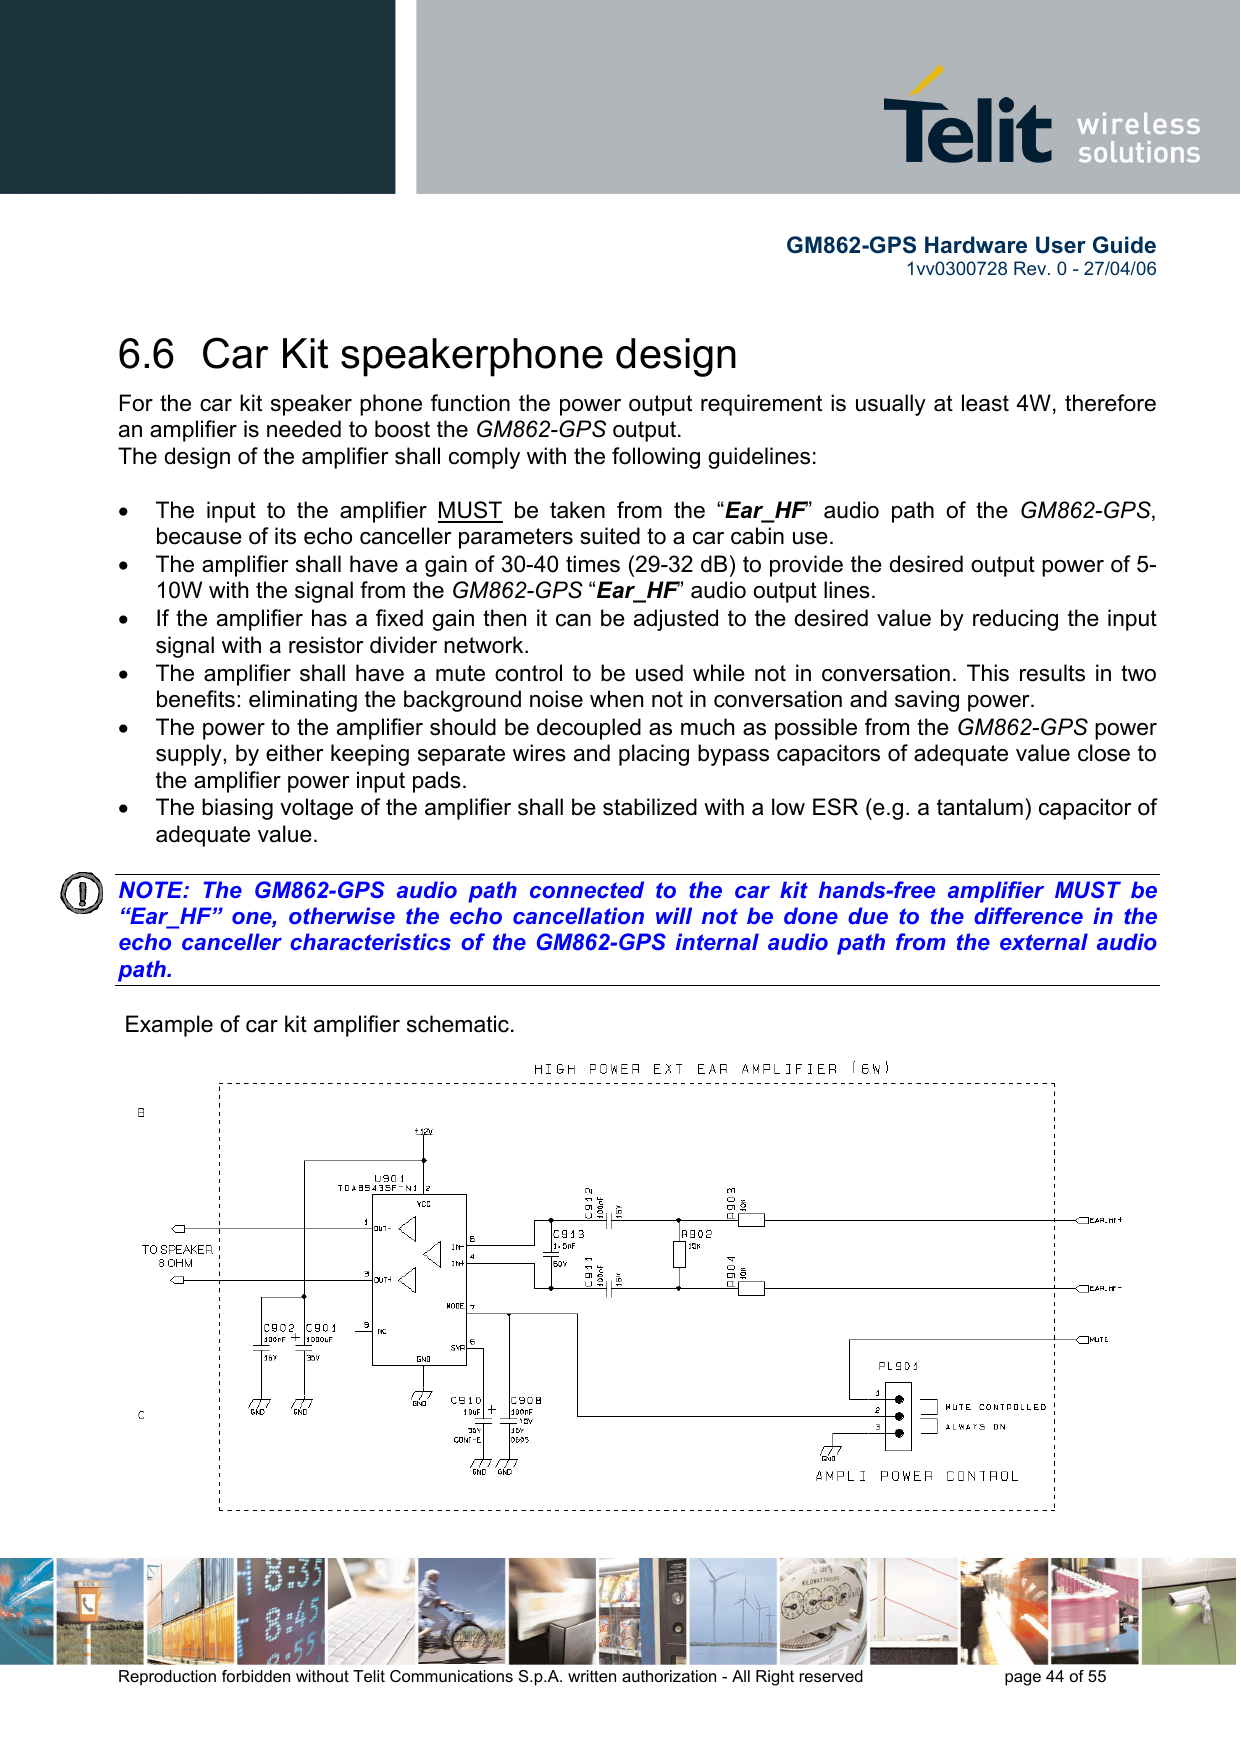        GM862-GPS Hardware User Guide   1vv0300728 Rev. 0 - 27/04/06    Reproduction forbidden without Telit Communications S.p.A. written authorization - All Right reserved    page 44 of 55  6.6  Car Kit speakerphone design For the car kit speaker phone function the power output requirement is usually at least 4W, therefore an amplifier is needed to boost the GM862-GPS output. The design of the amplifier shall comply with the following guidelines:  •  The input to the amplifier MUST be taken from the “Ear_HF” audio path of the GM862-GPS, because of its echo canceller parameters suited to a car cabin use. •  The amplifier shall have a gain of 30-40 times (29-32 dB) to provide the desired output power of 5-10W with the signal from the GM862-GPS “Ear_HF” audio output lines. •  If the amplifier has a fixed gain then it can be adjusted to the desired value by reducing the input signal with a resistor divider network. •  The amplifier shall have a mute control to be used while not in conversation. This results in two benefits: eliminating the background noise when not in conversation and saving power. •  The power to the amplifier should be decoupled as much as possible from the GM862-GPS power supply, by either keeping separate wires and placing bypass capacitors of adequate value close to the amplifier power input pads. •  The biasing voltage of the amplifier shall be stabilized with a low ESR (e.g. a tantalum) capacitor of adequate value.   NOTE: The GM862-GPS audio path connected to the car kit hands-free amplifier MUST be “Ear_HF” one, otherwise the echo cancellation will not be done due to the difference in the echo canceller characteristics of the GM862-GPS internal audio path from the external audio path.     Example of car kit amplifier schematic. 